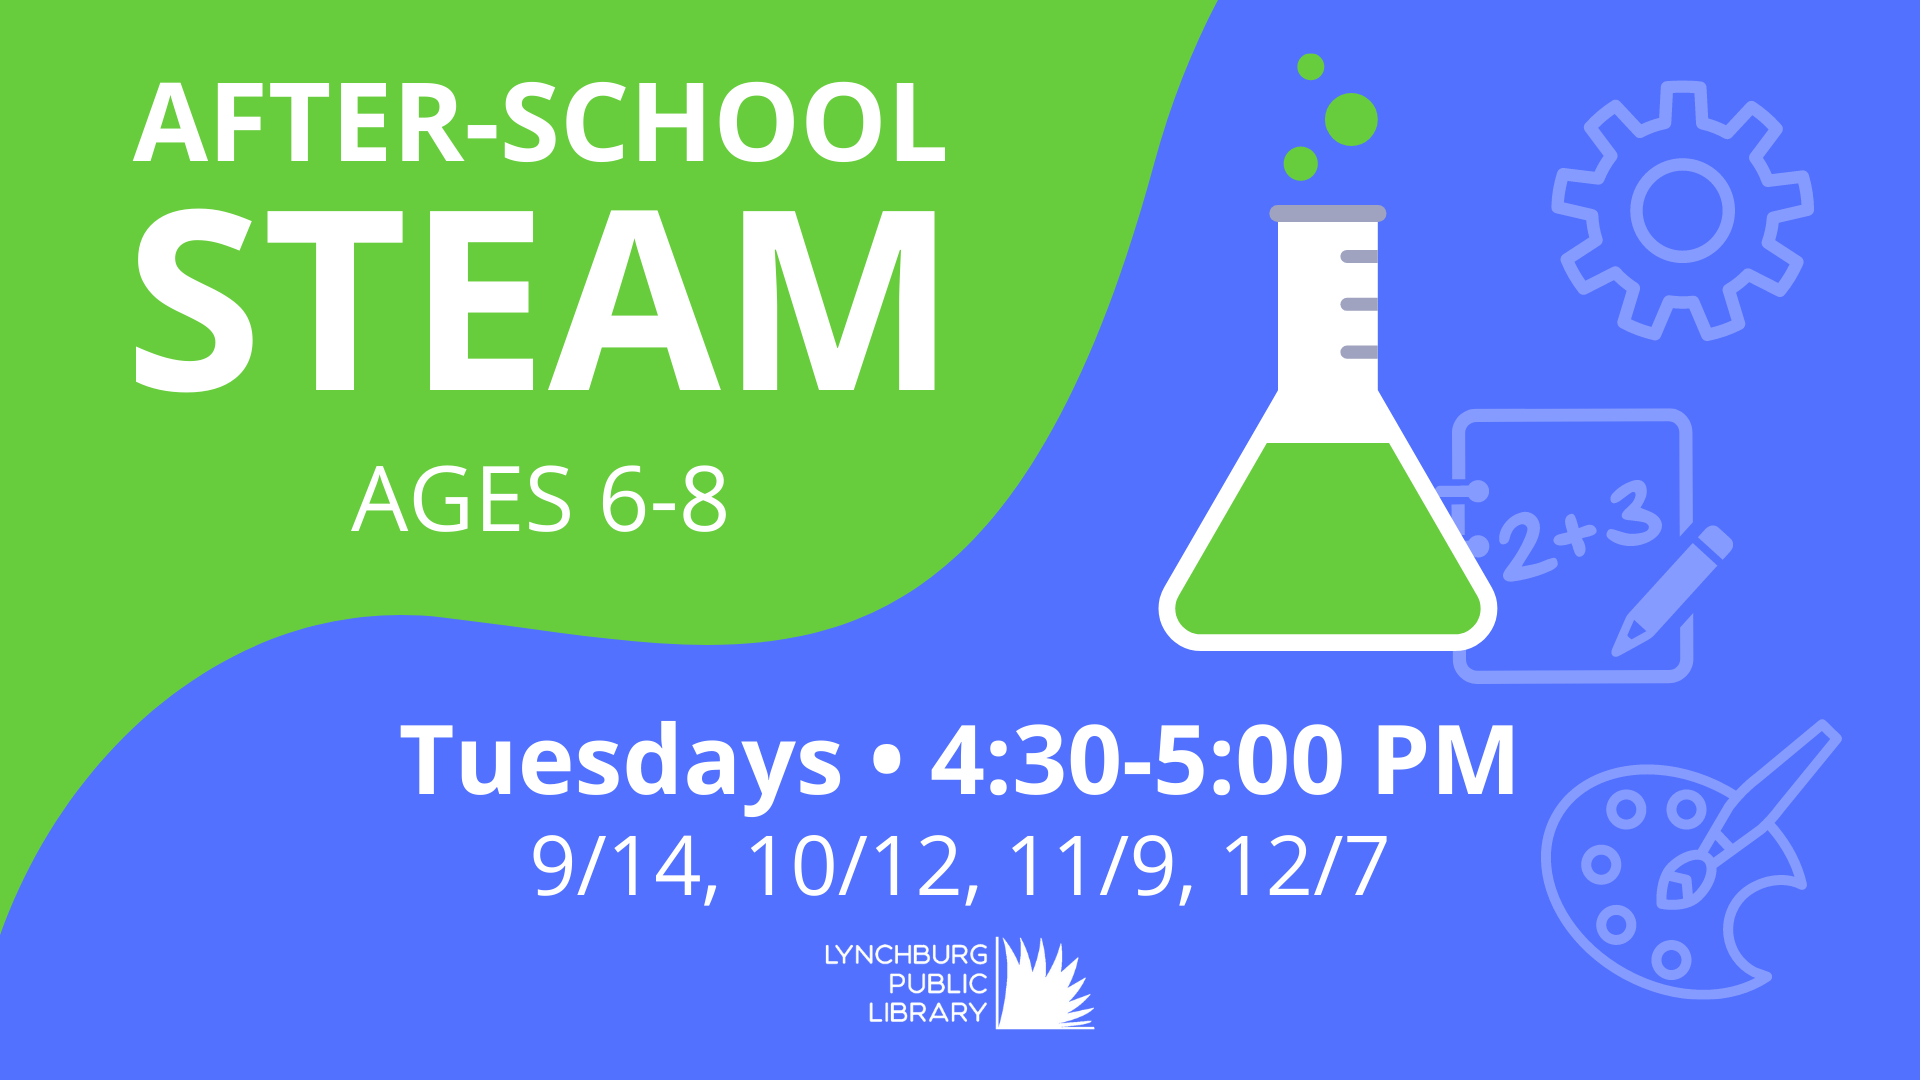 Image features green and blue swirls with illustrations of a beaker, cog, math worksheet, and artist's palette along with the program title (After-School STEAM, ages 6-8) with dates and times as described in this event